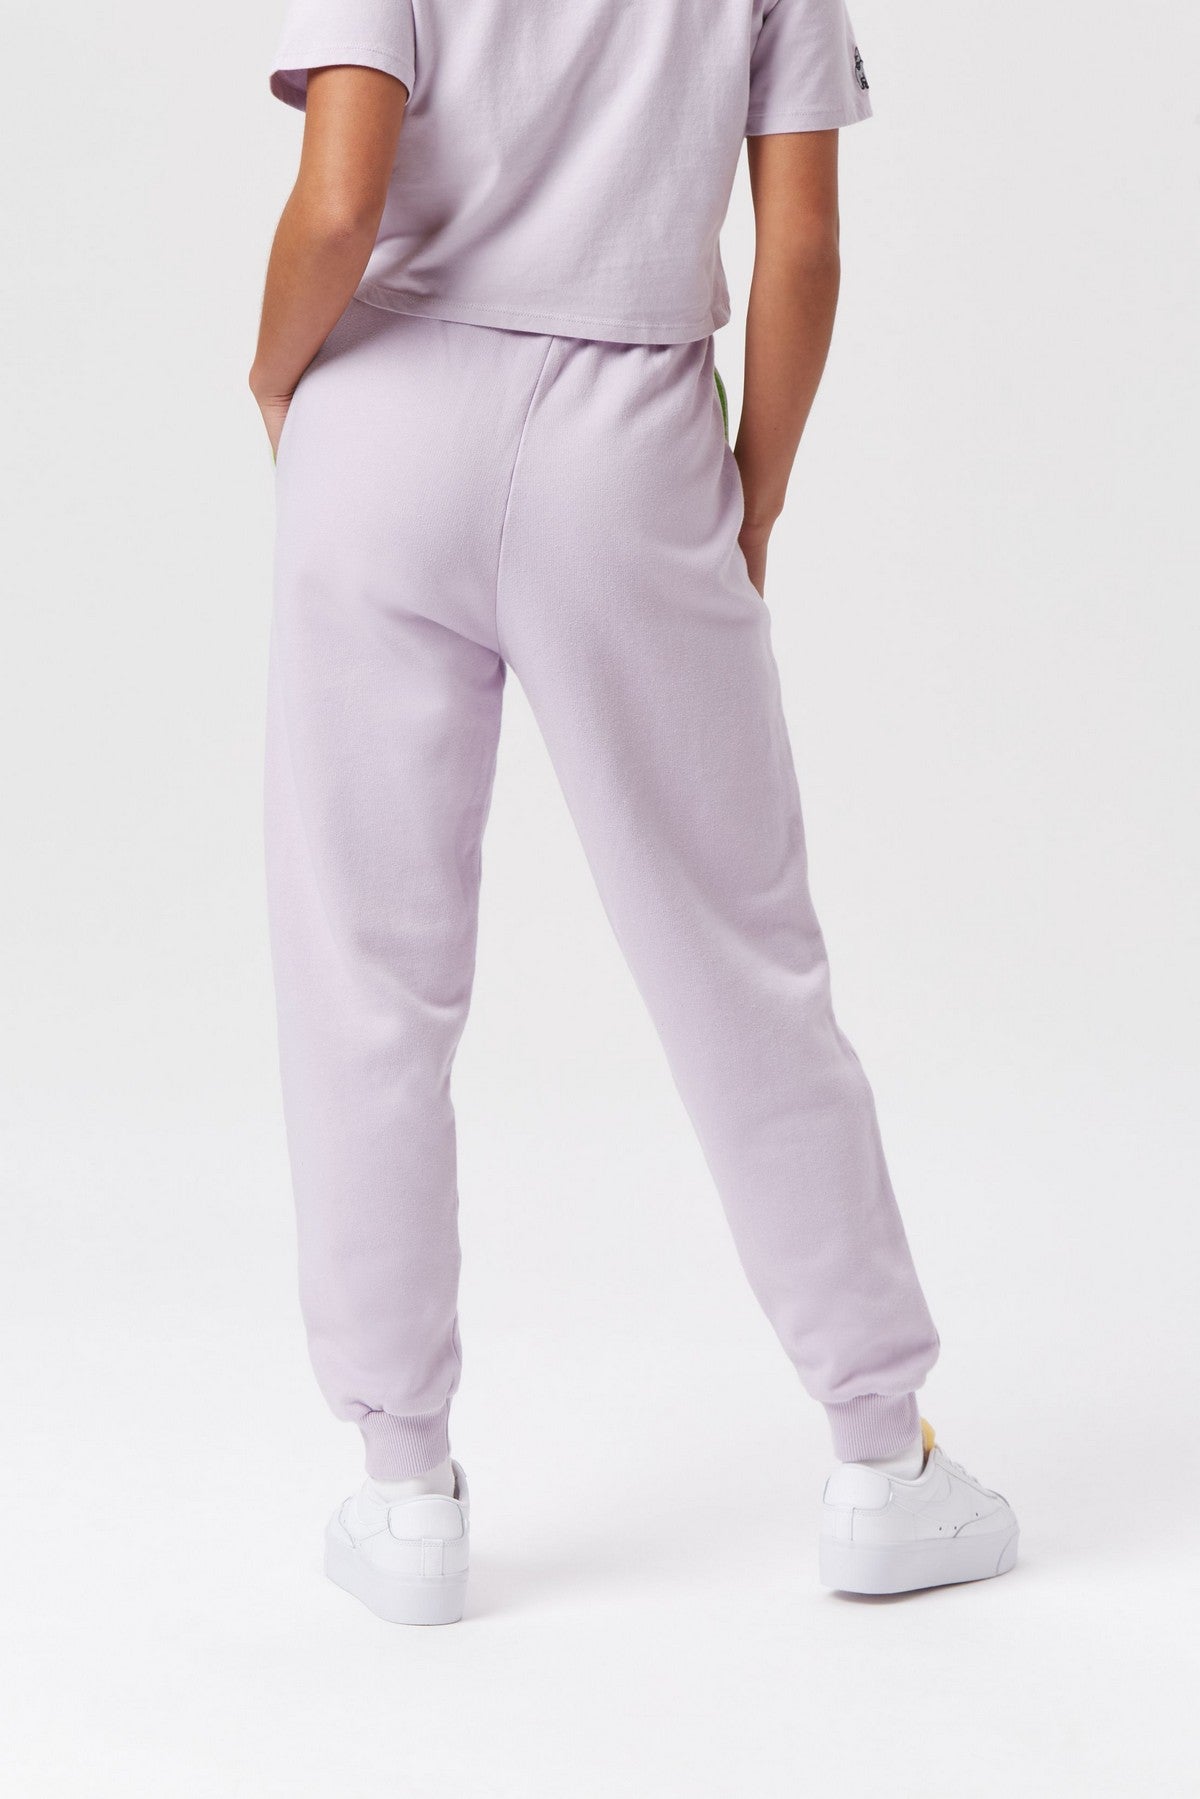 MAJI 'G' COLLECTION JOGGERS - LILAC - THAT GORILLA BRAND